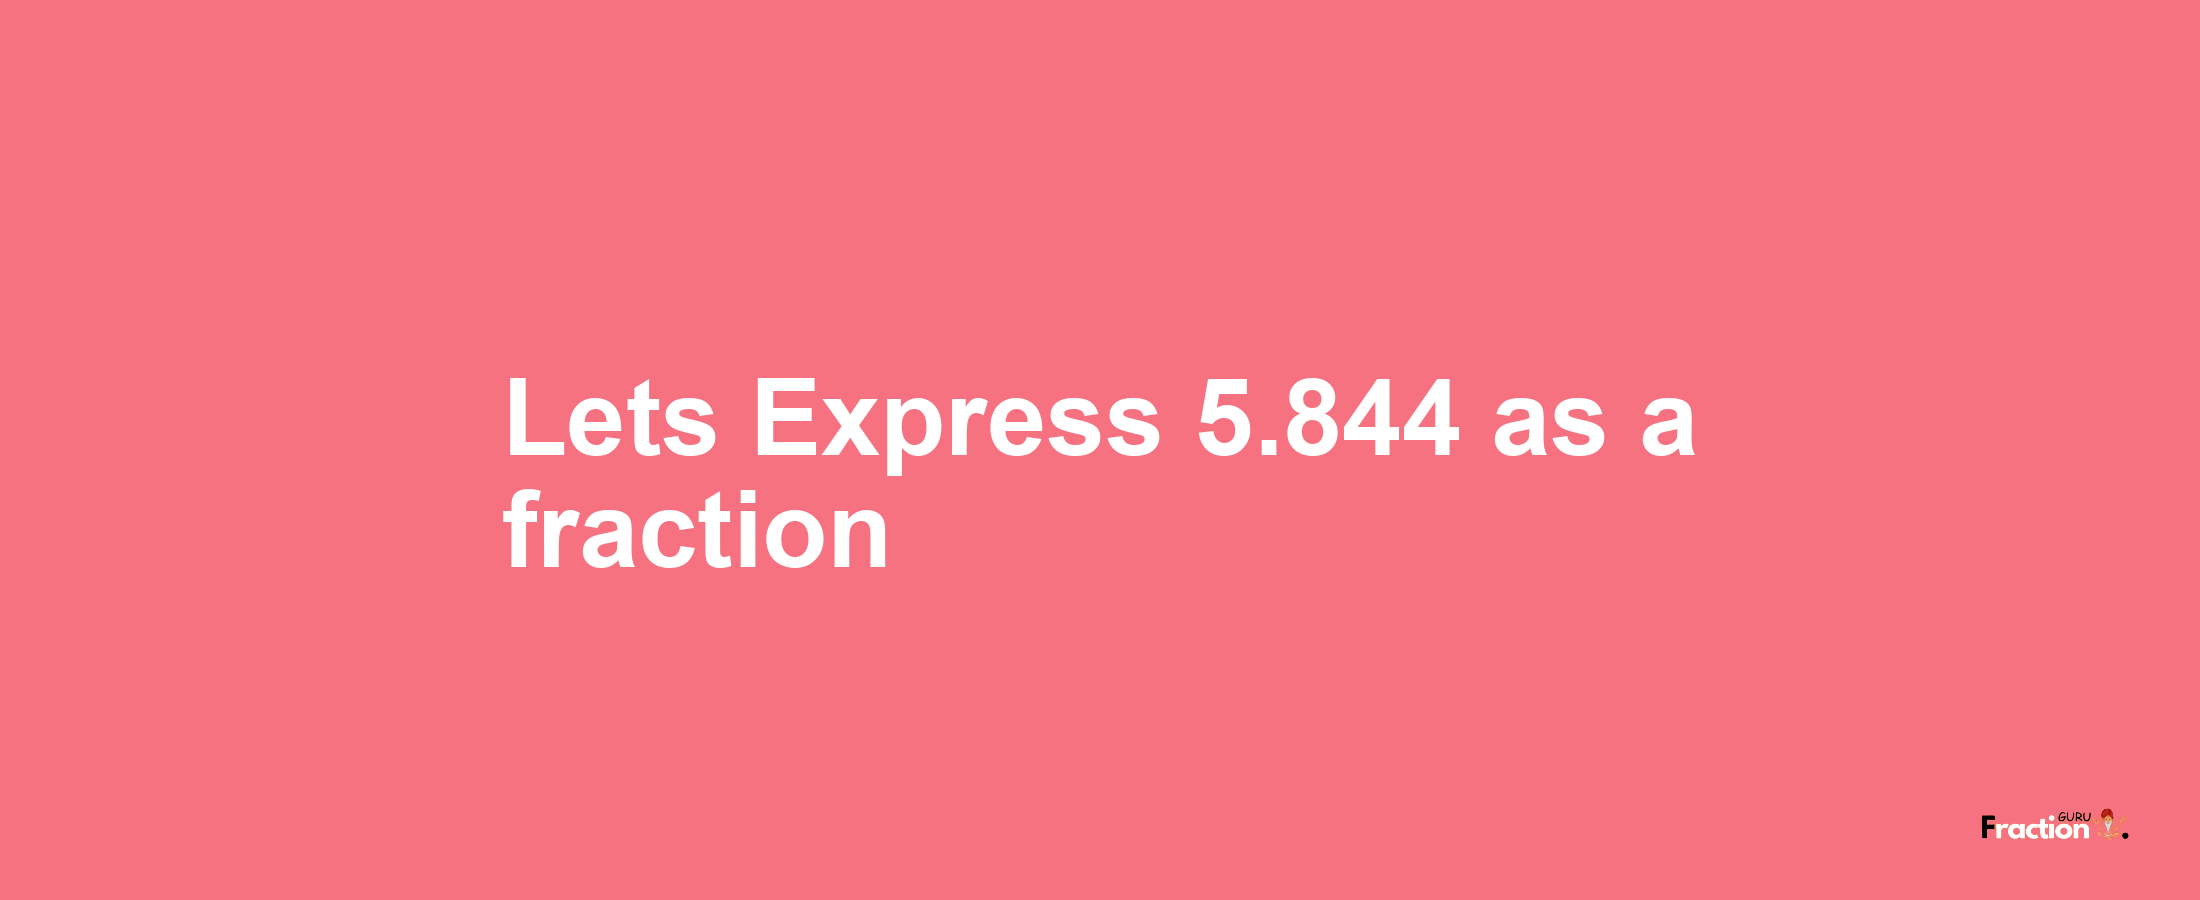 Lets Express 5.844 as afraction